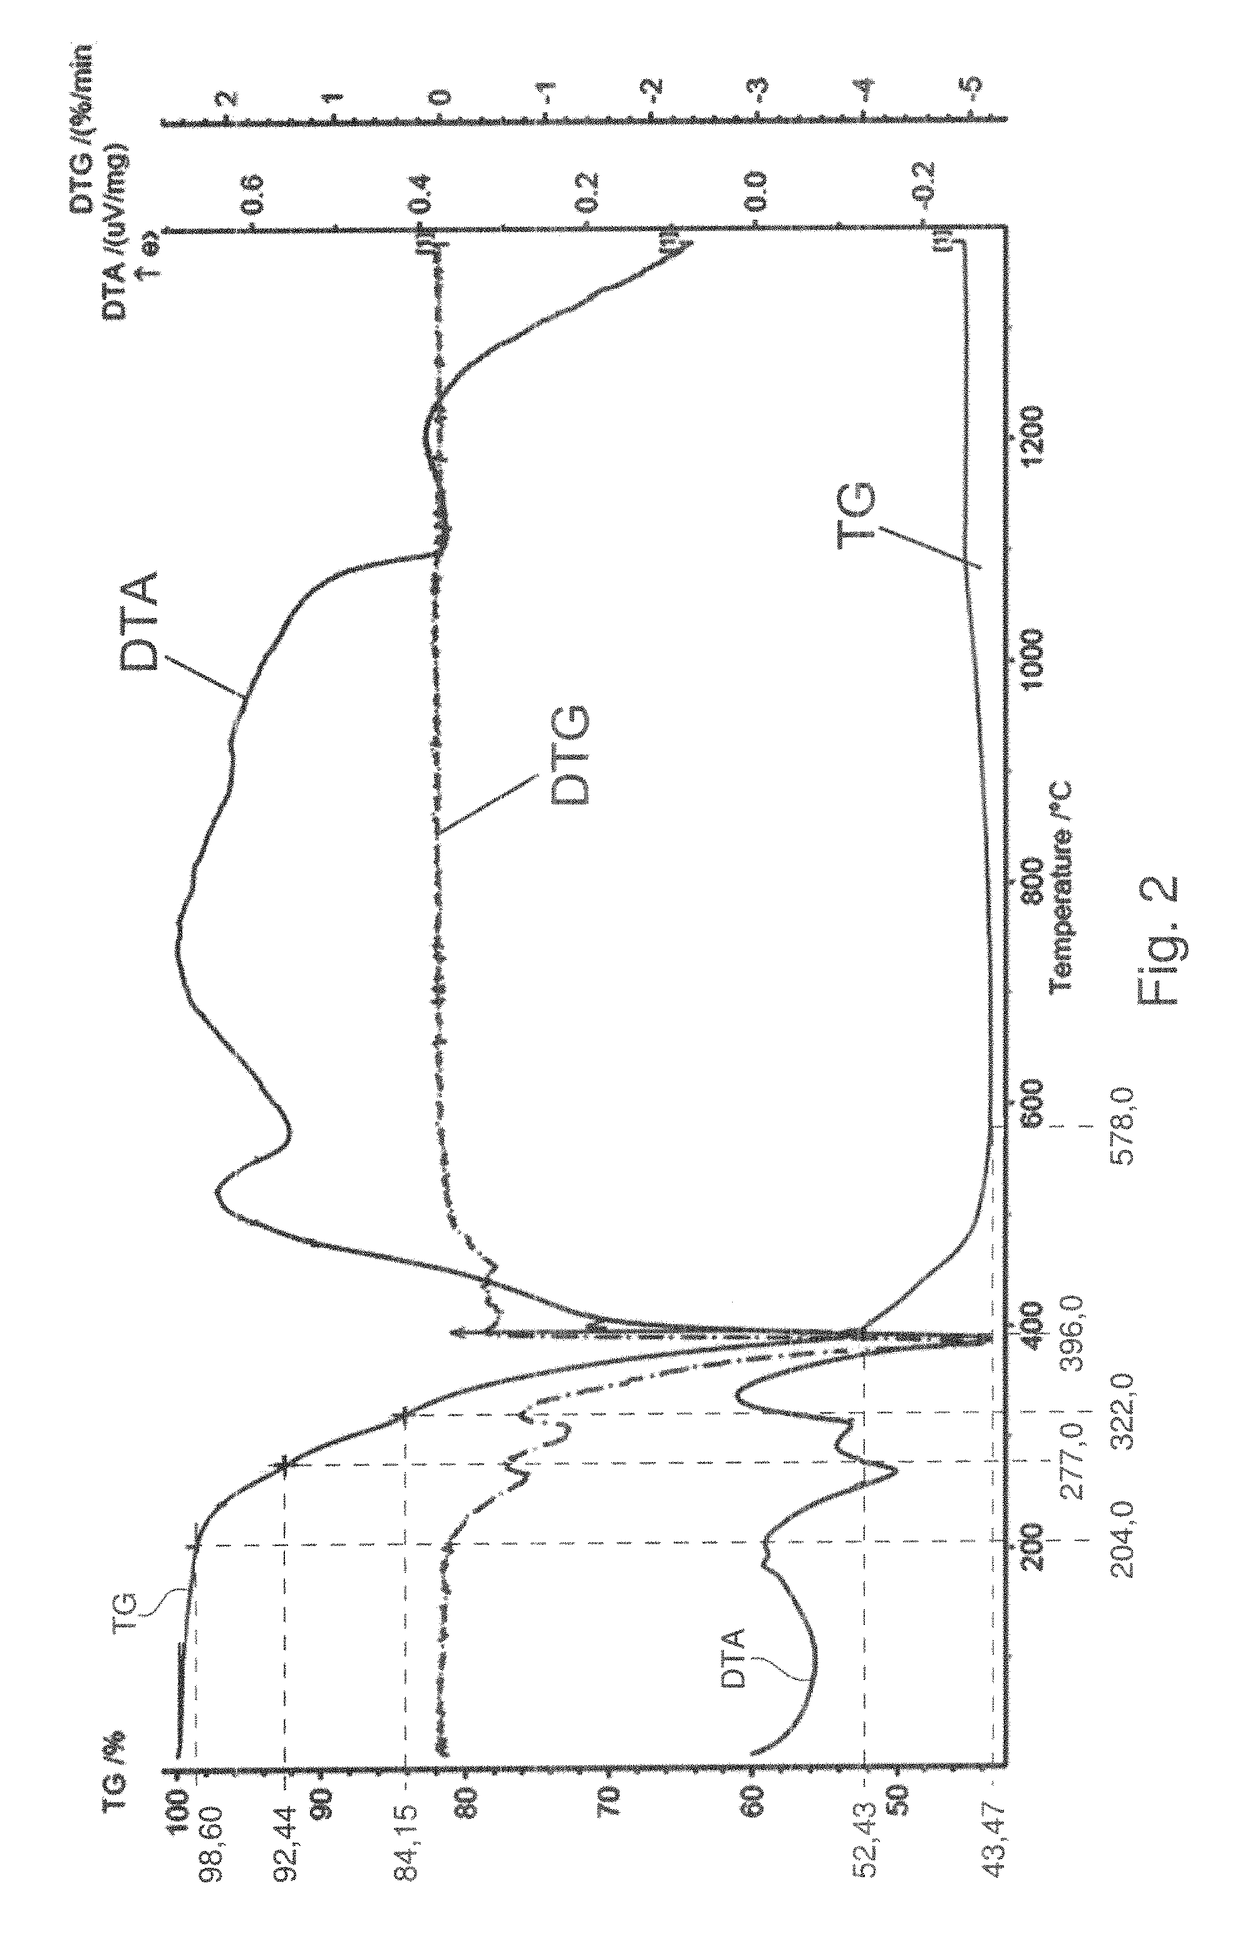 Electrode comprising a transition metal oxidenitride or a nitrogen-doped transition metal oxide as electronically active material